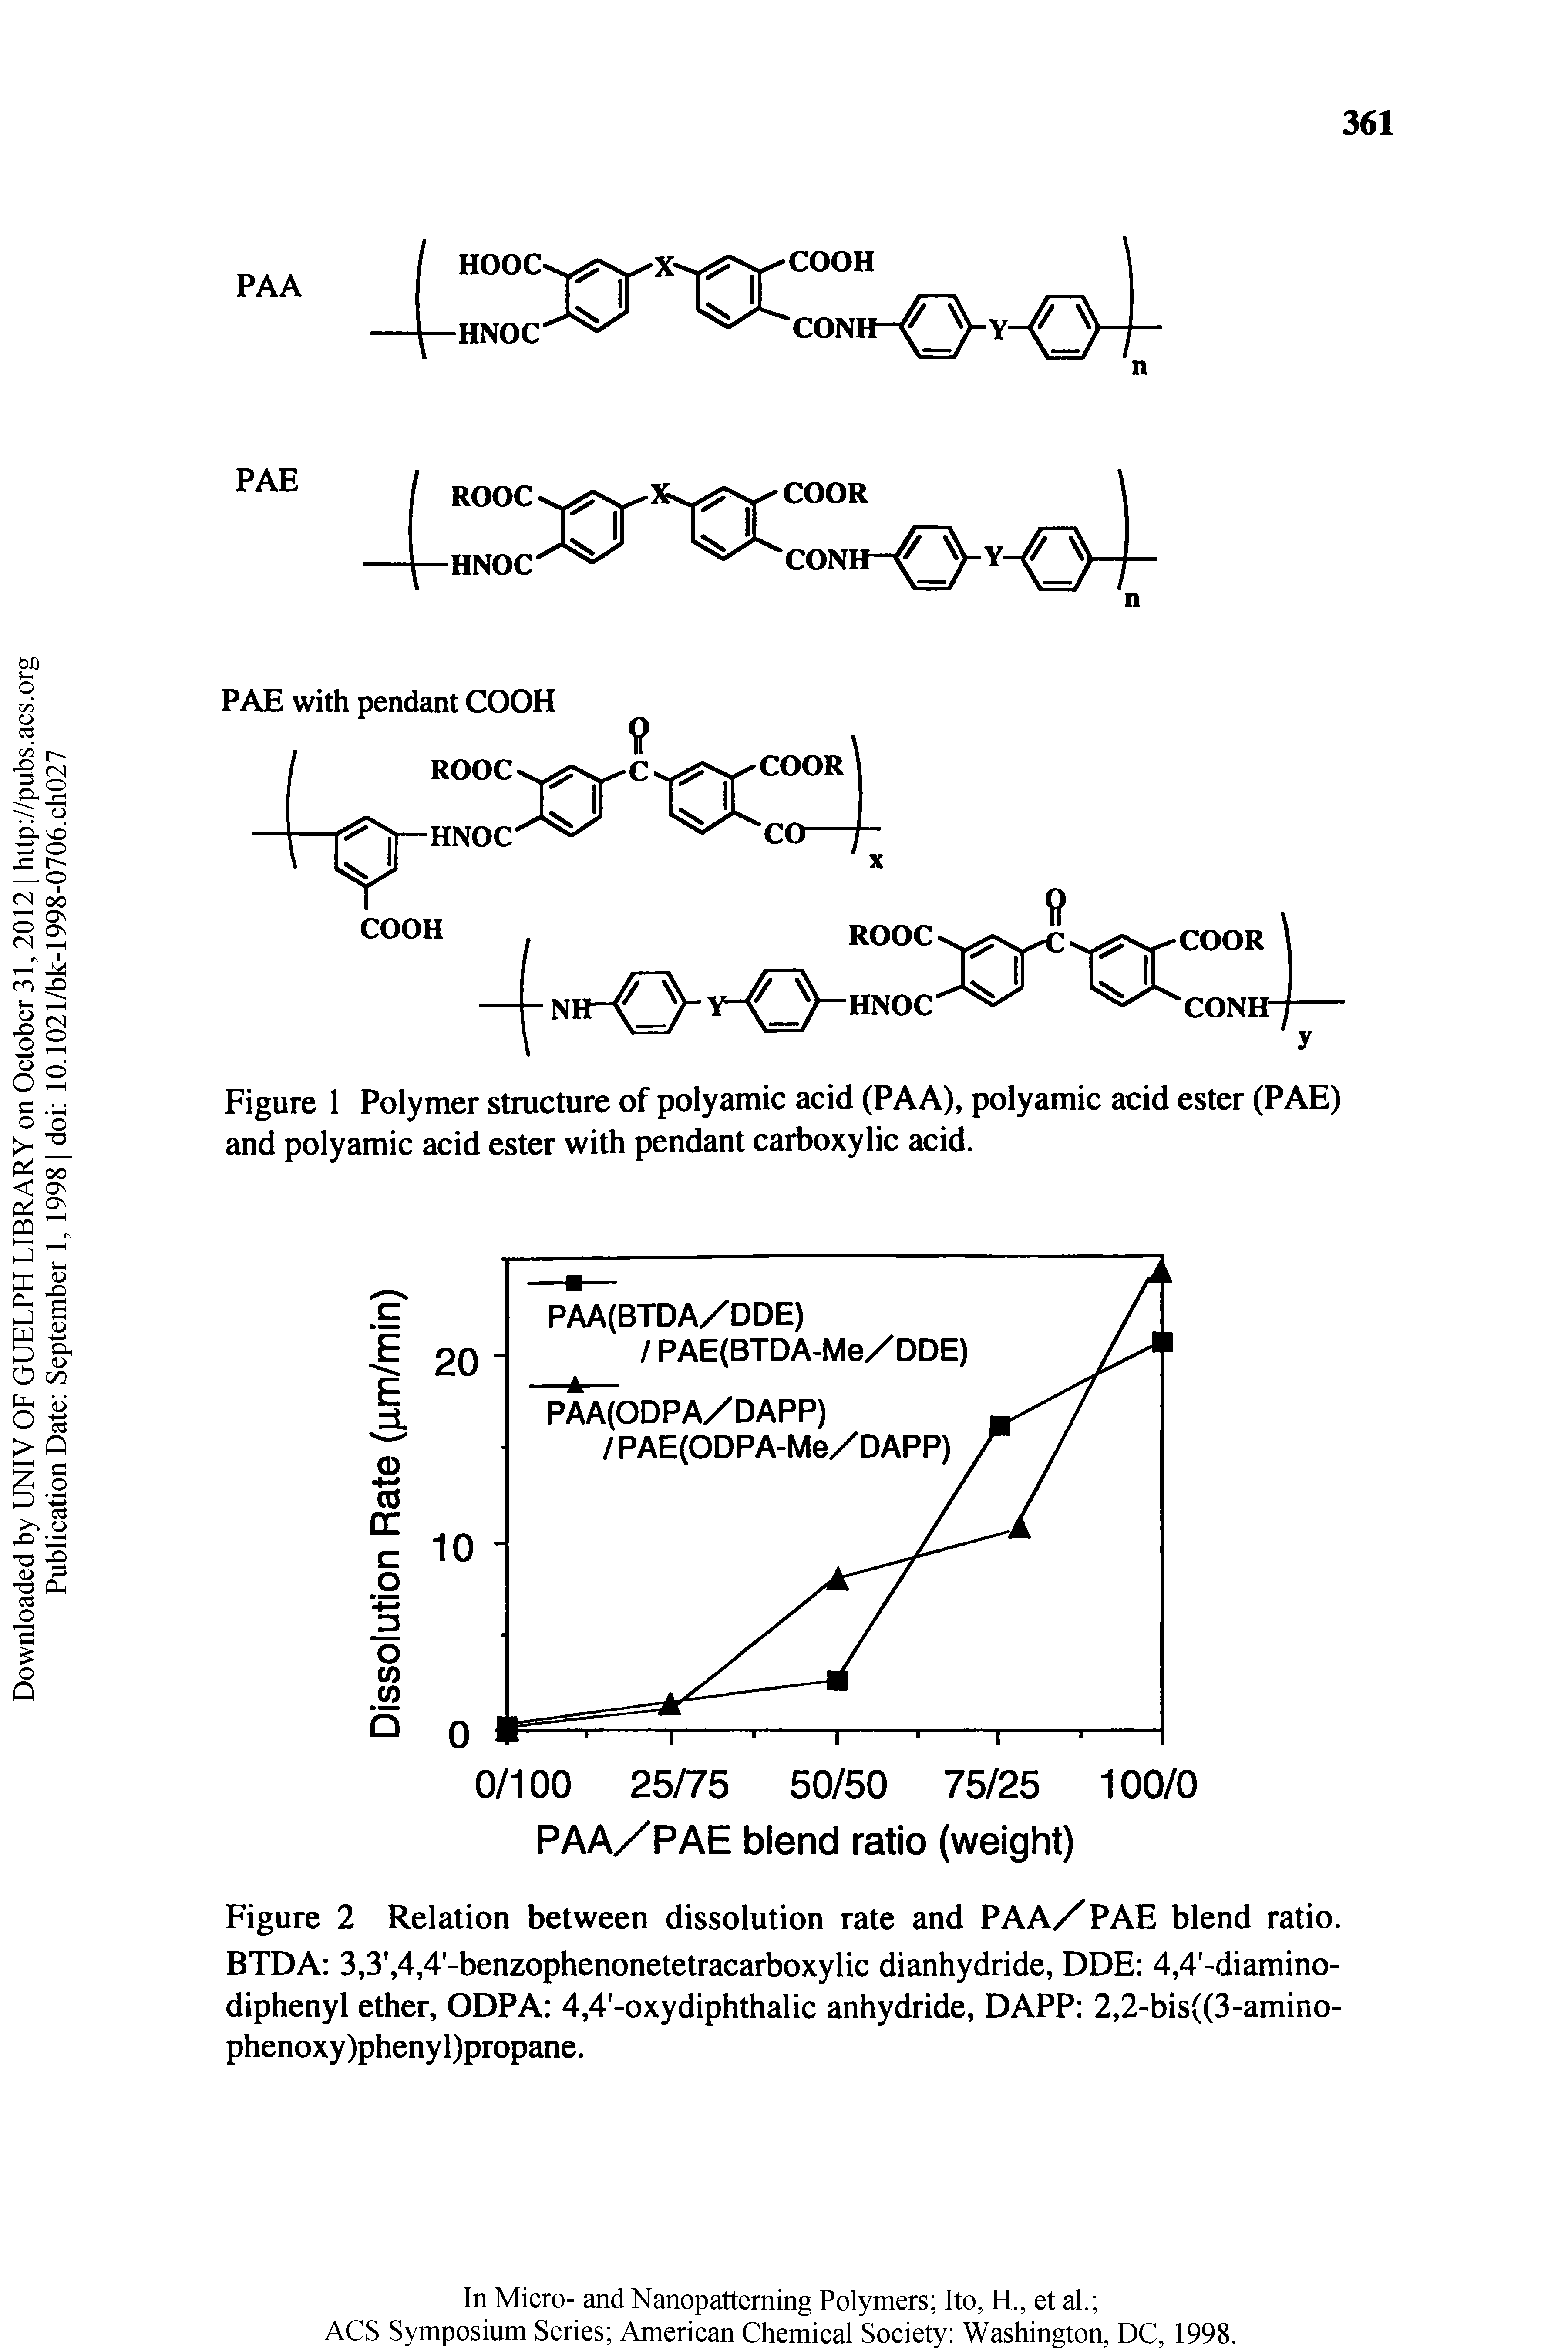 Figure 2 Relation between dissolution rate and PAA/PAE blend ratio. BTDA 3,3, 4,4-benzophenonetetracarboxylic dianhydride, DDE 4,4 -diamino-diphenyl ether, ODPA 4,4 -oxydiphthalic anhydride, DAPP 2,2-bis((3-amino-phenoxy)phenyl)propane.